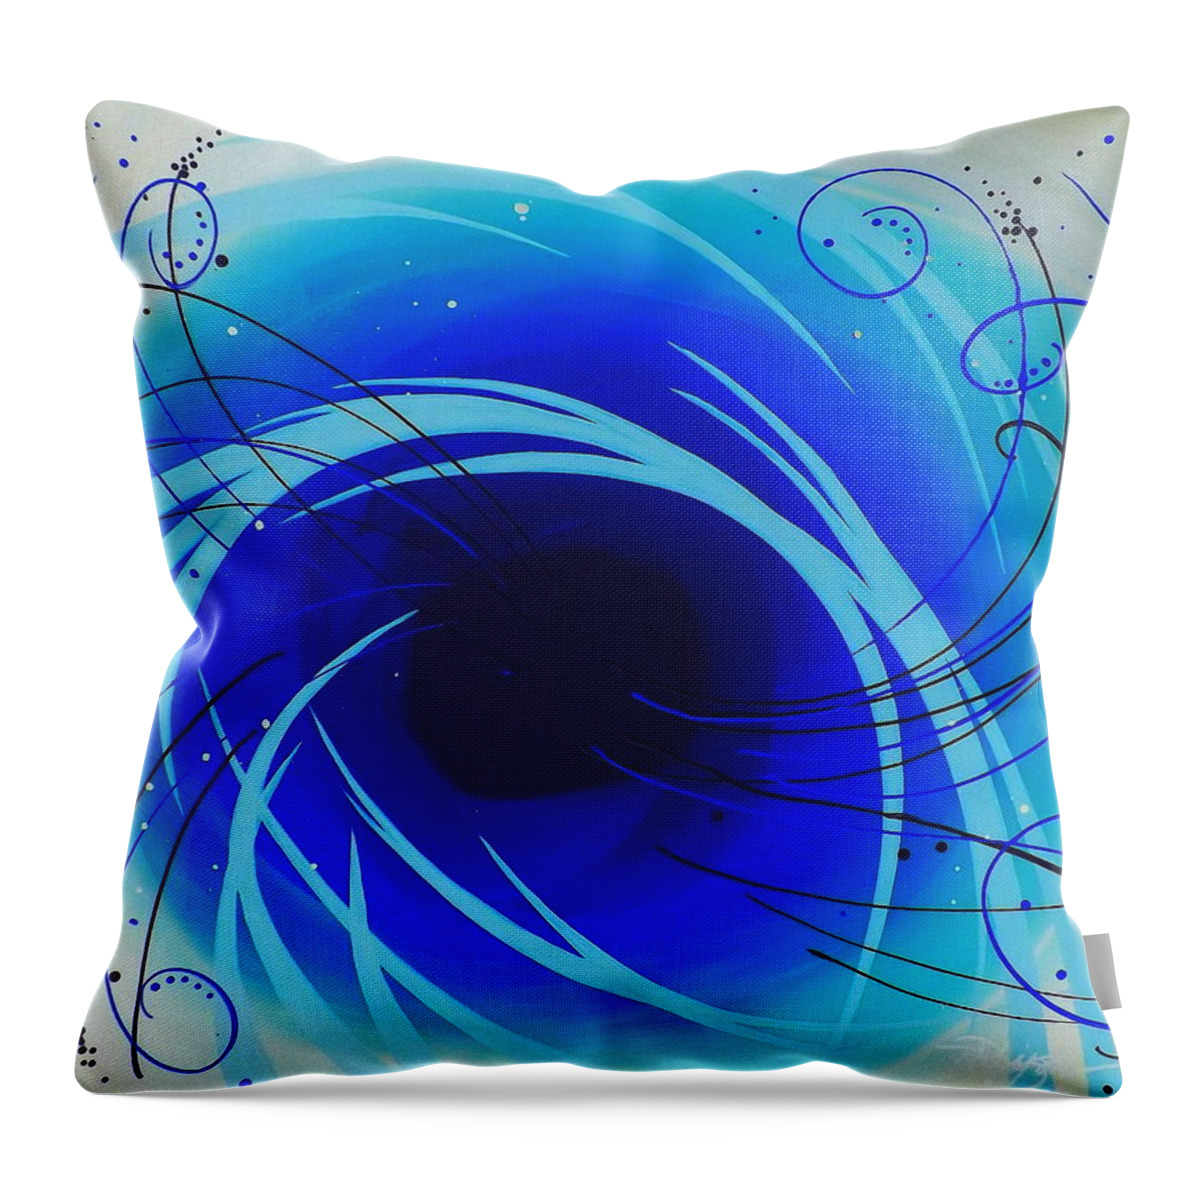 Eye Of The Hurricane Inverted Throw Pillow featuring the painting Eye of the Hurricane Inverted by Darren Robinson